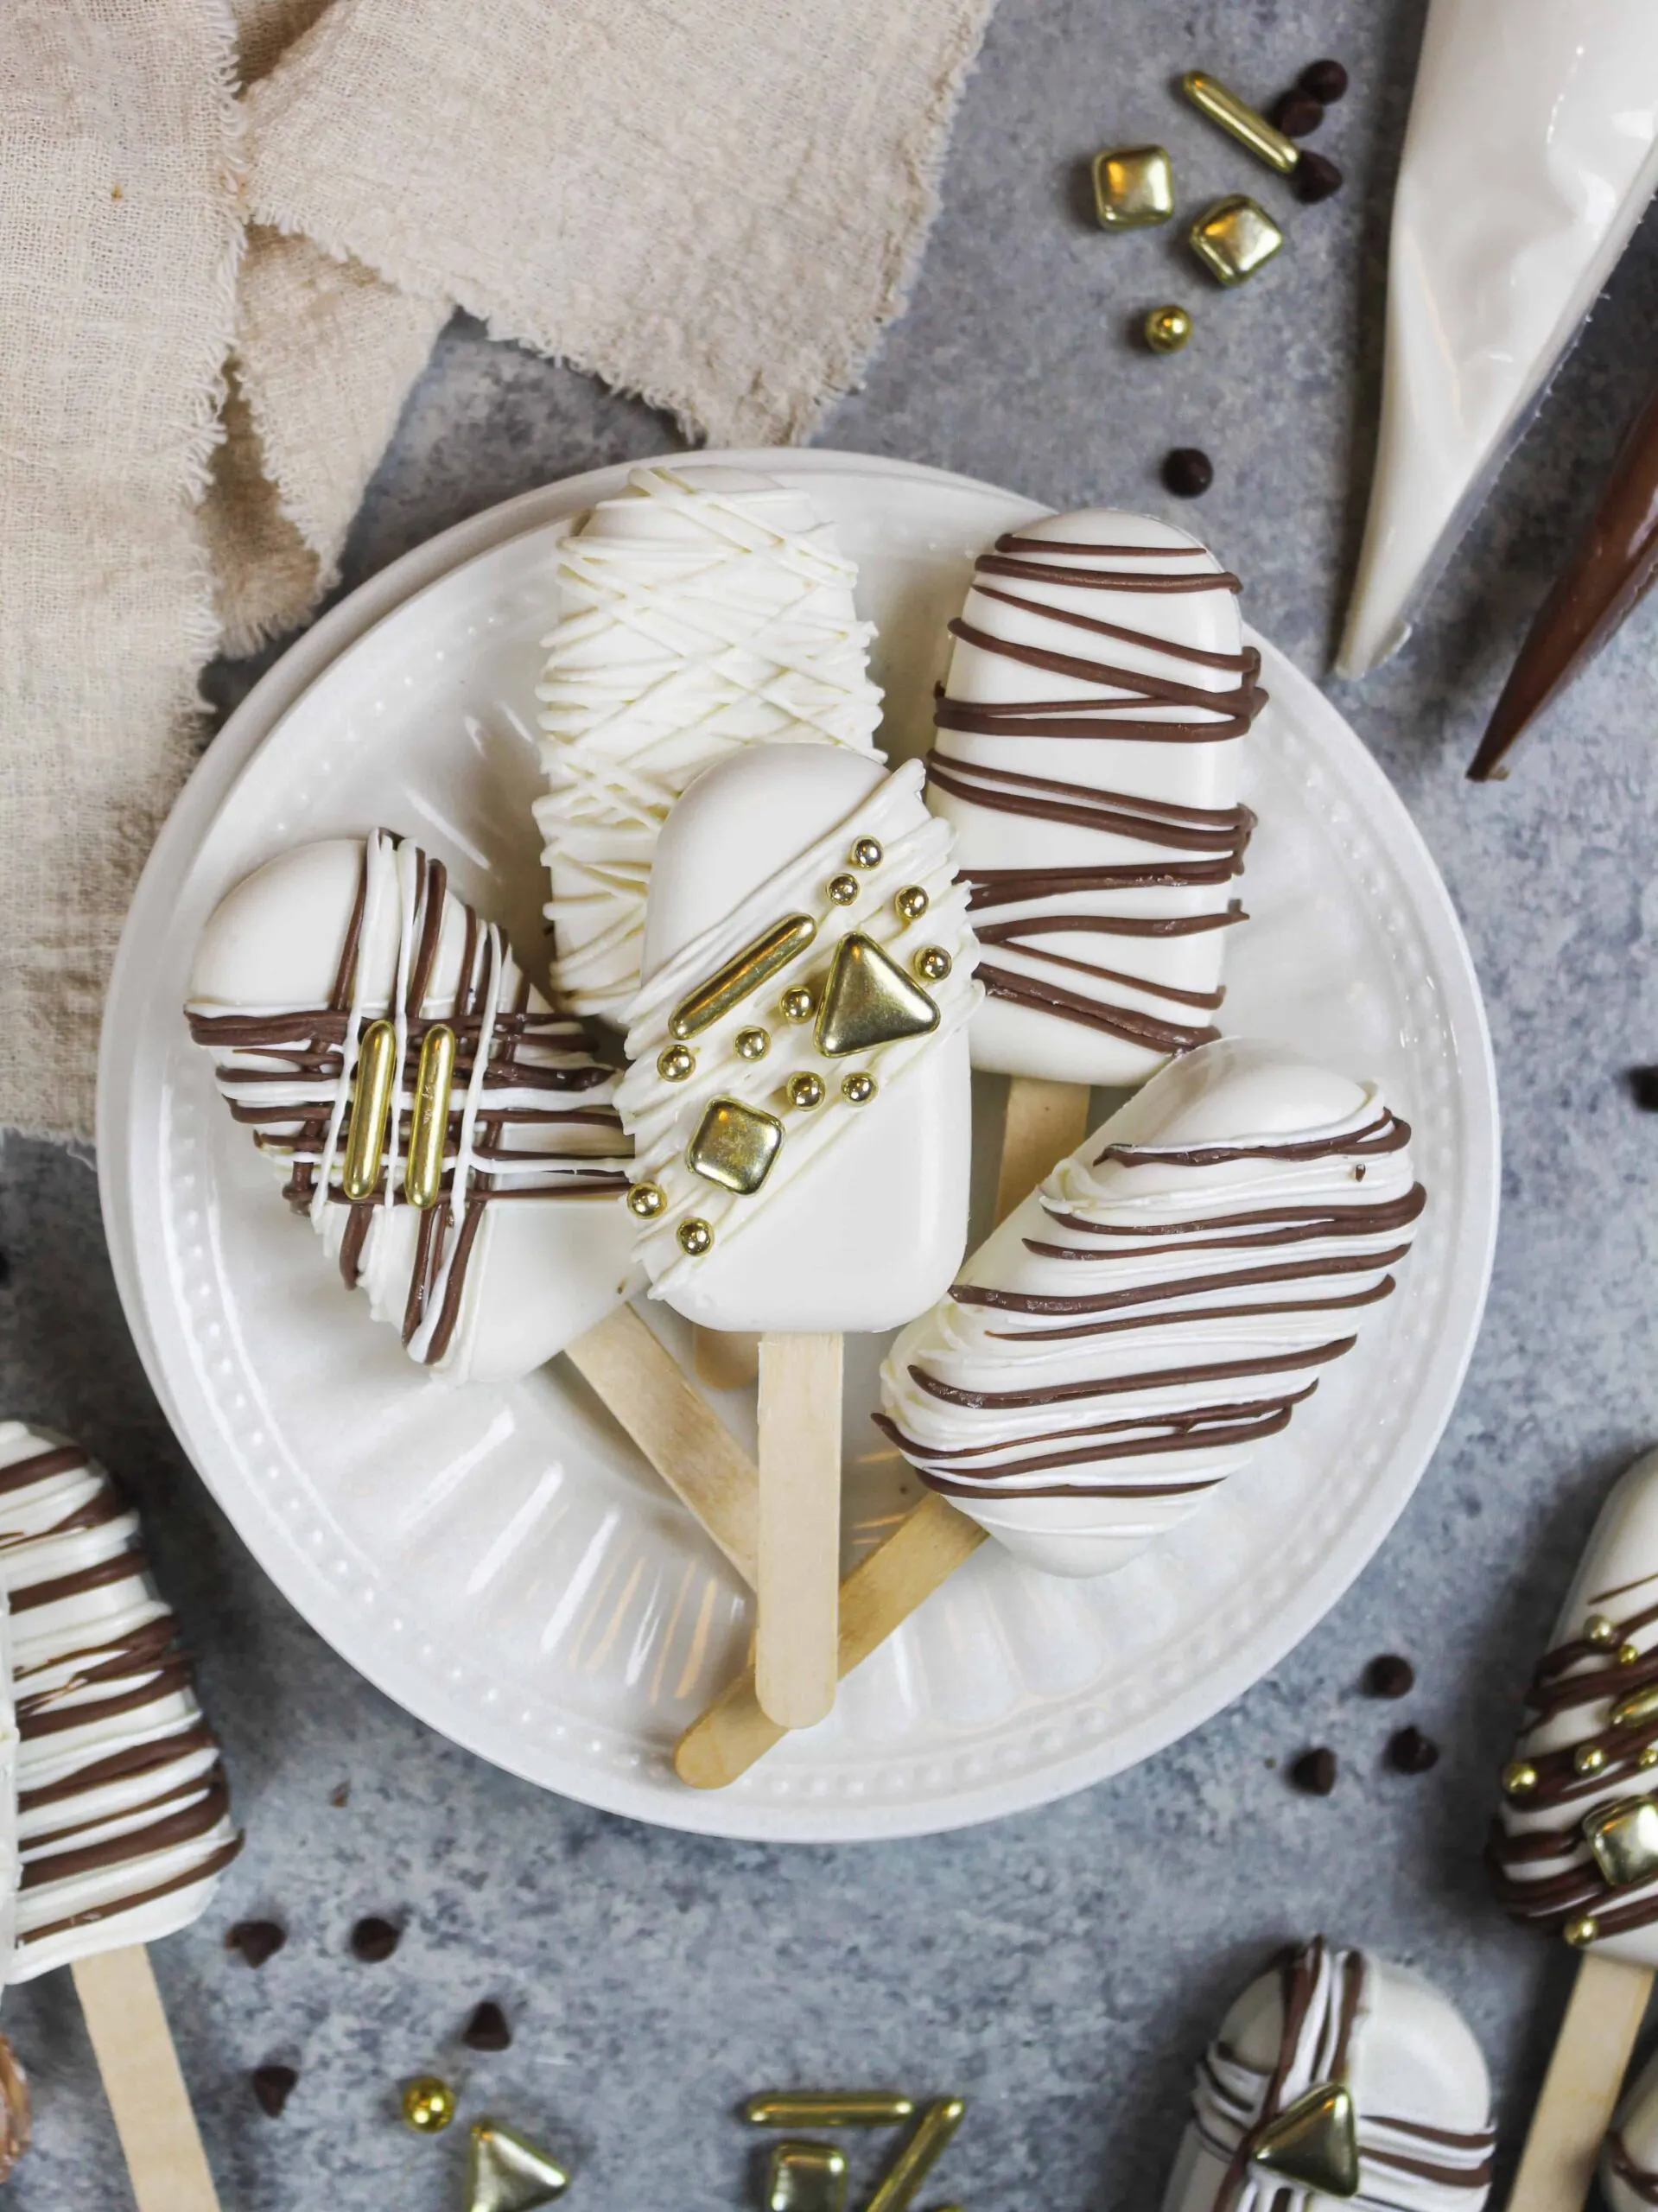 image of cakesicles decorated with white and dark chocolate drizzles